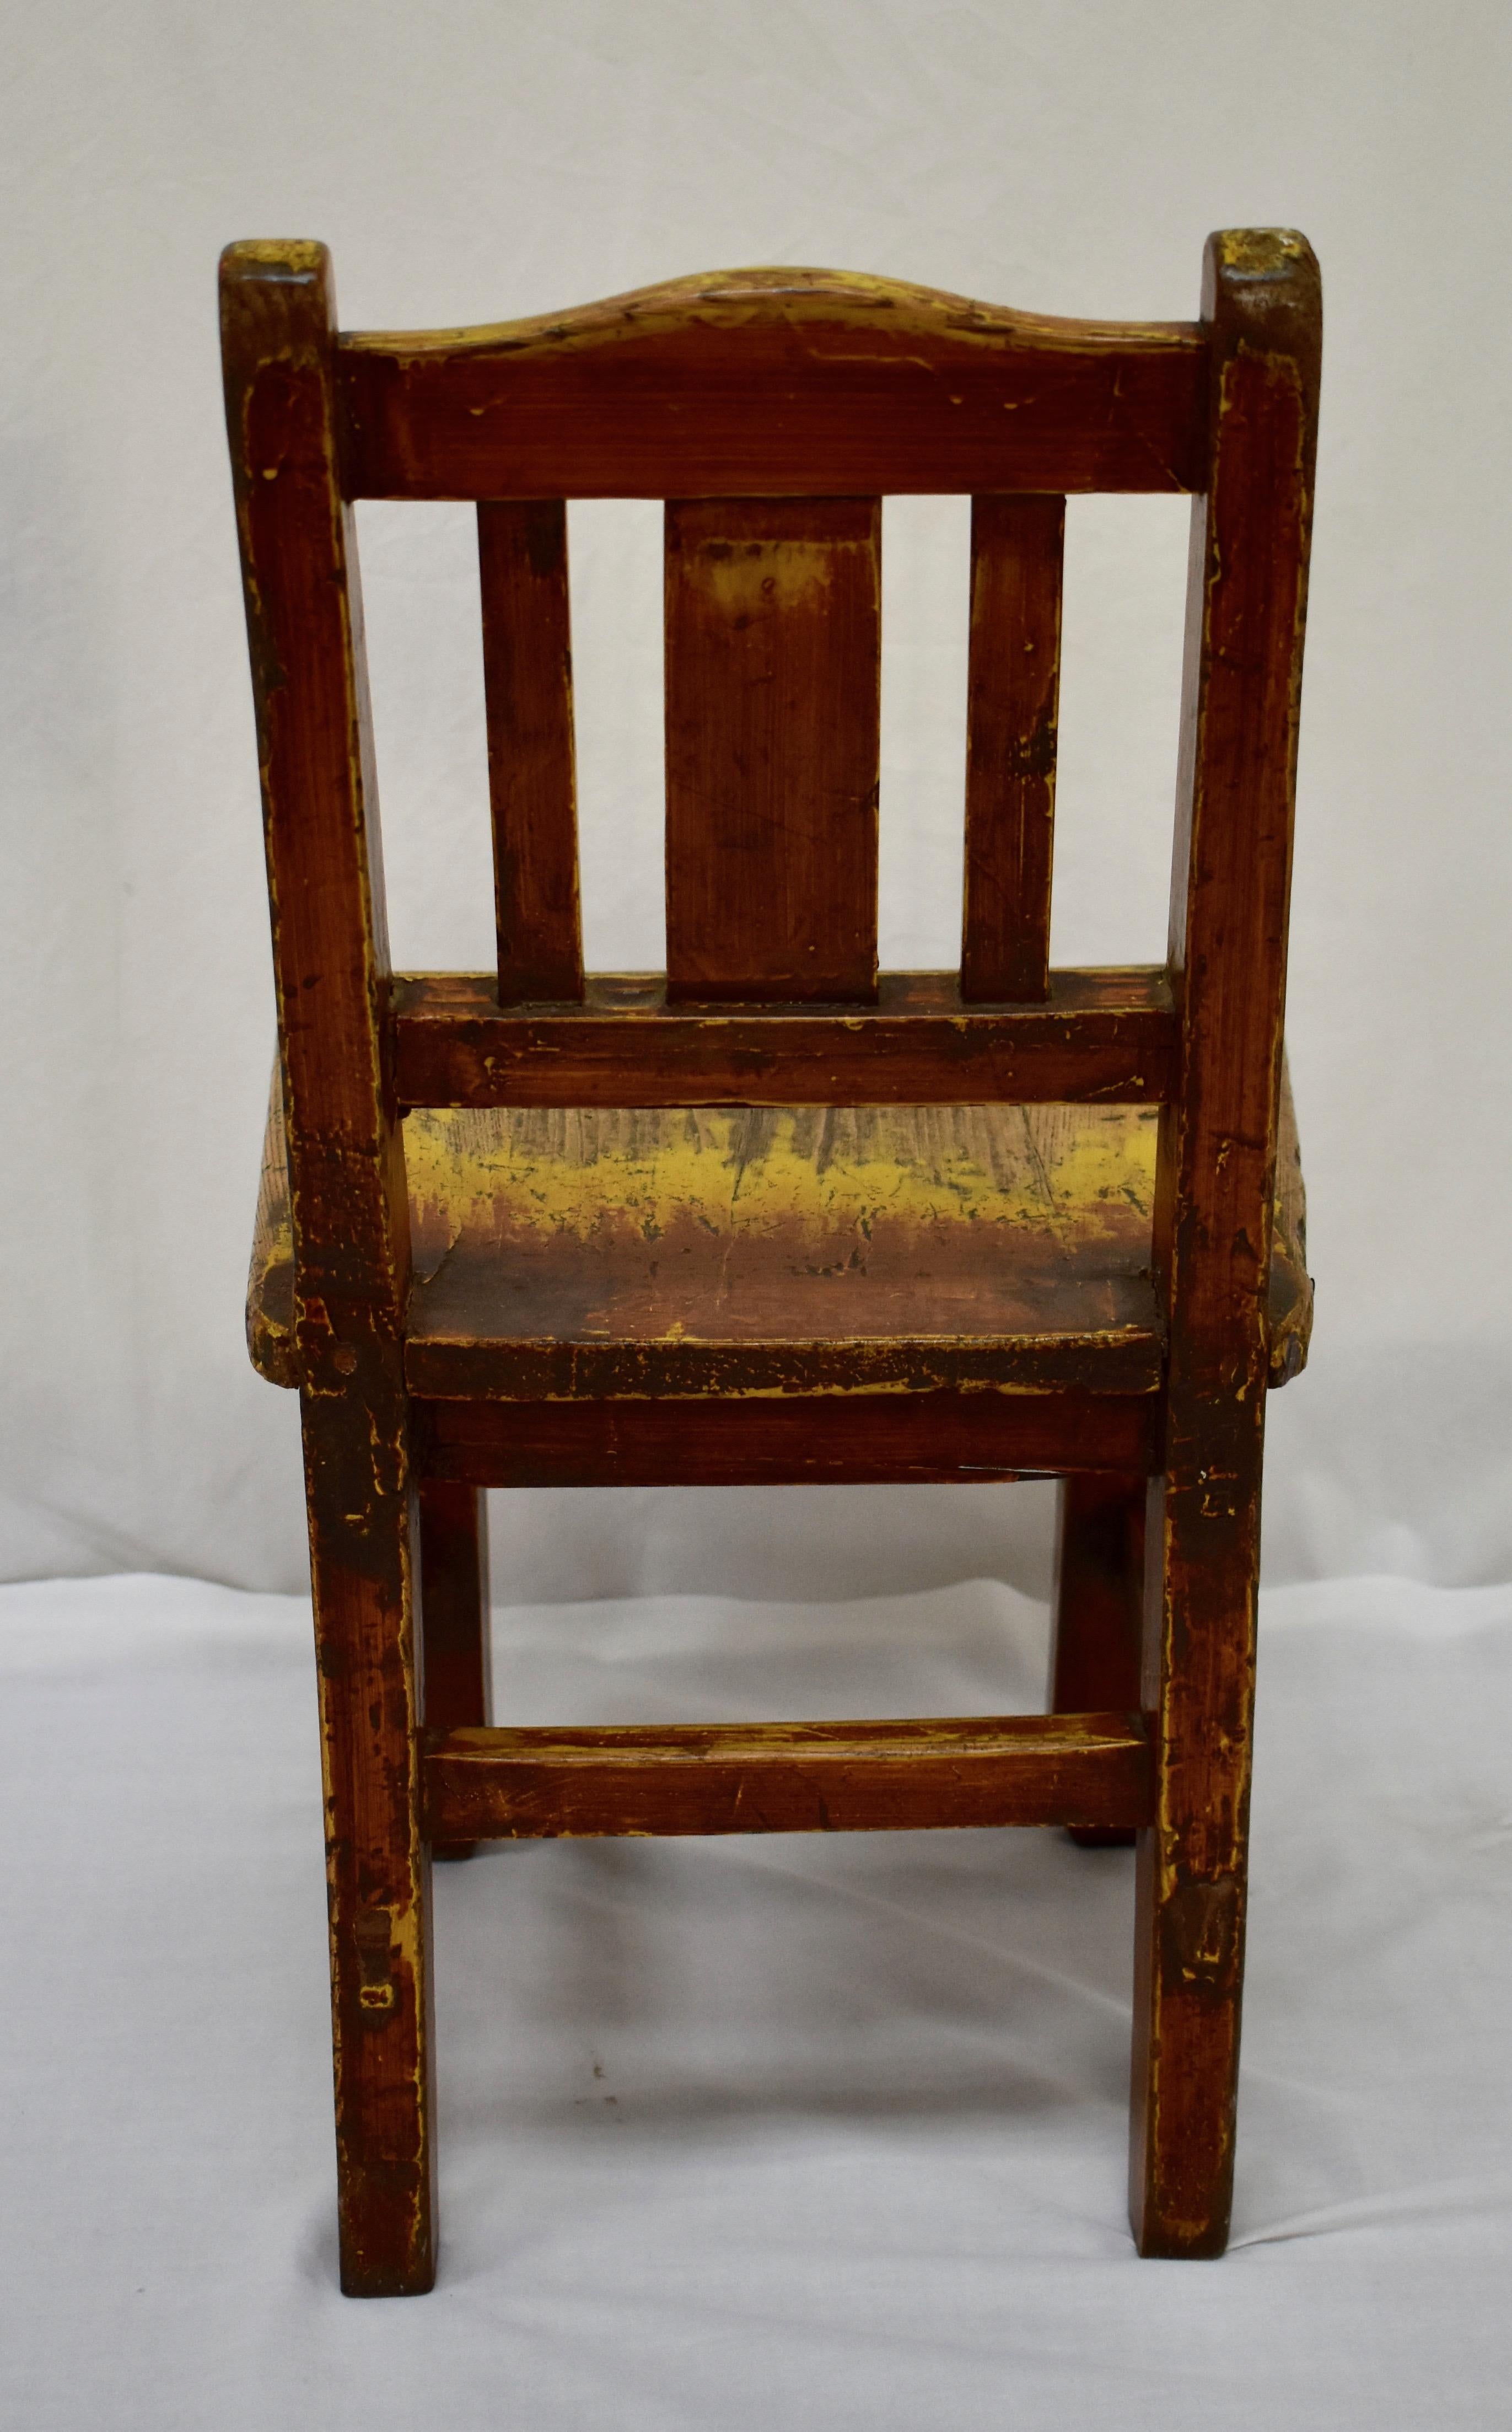 19th Century Painted Oak Plank-Seat Child's Chair